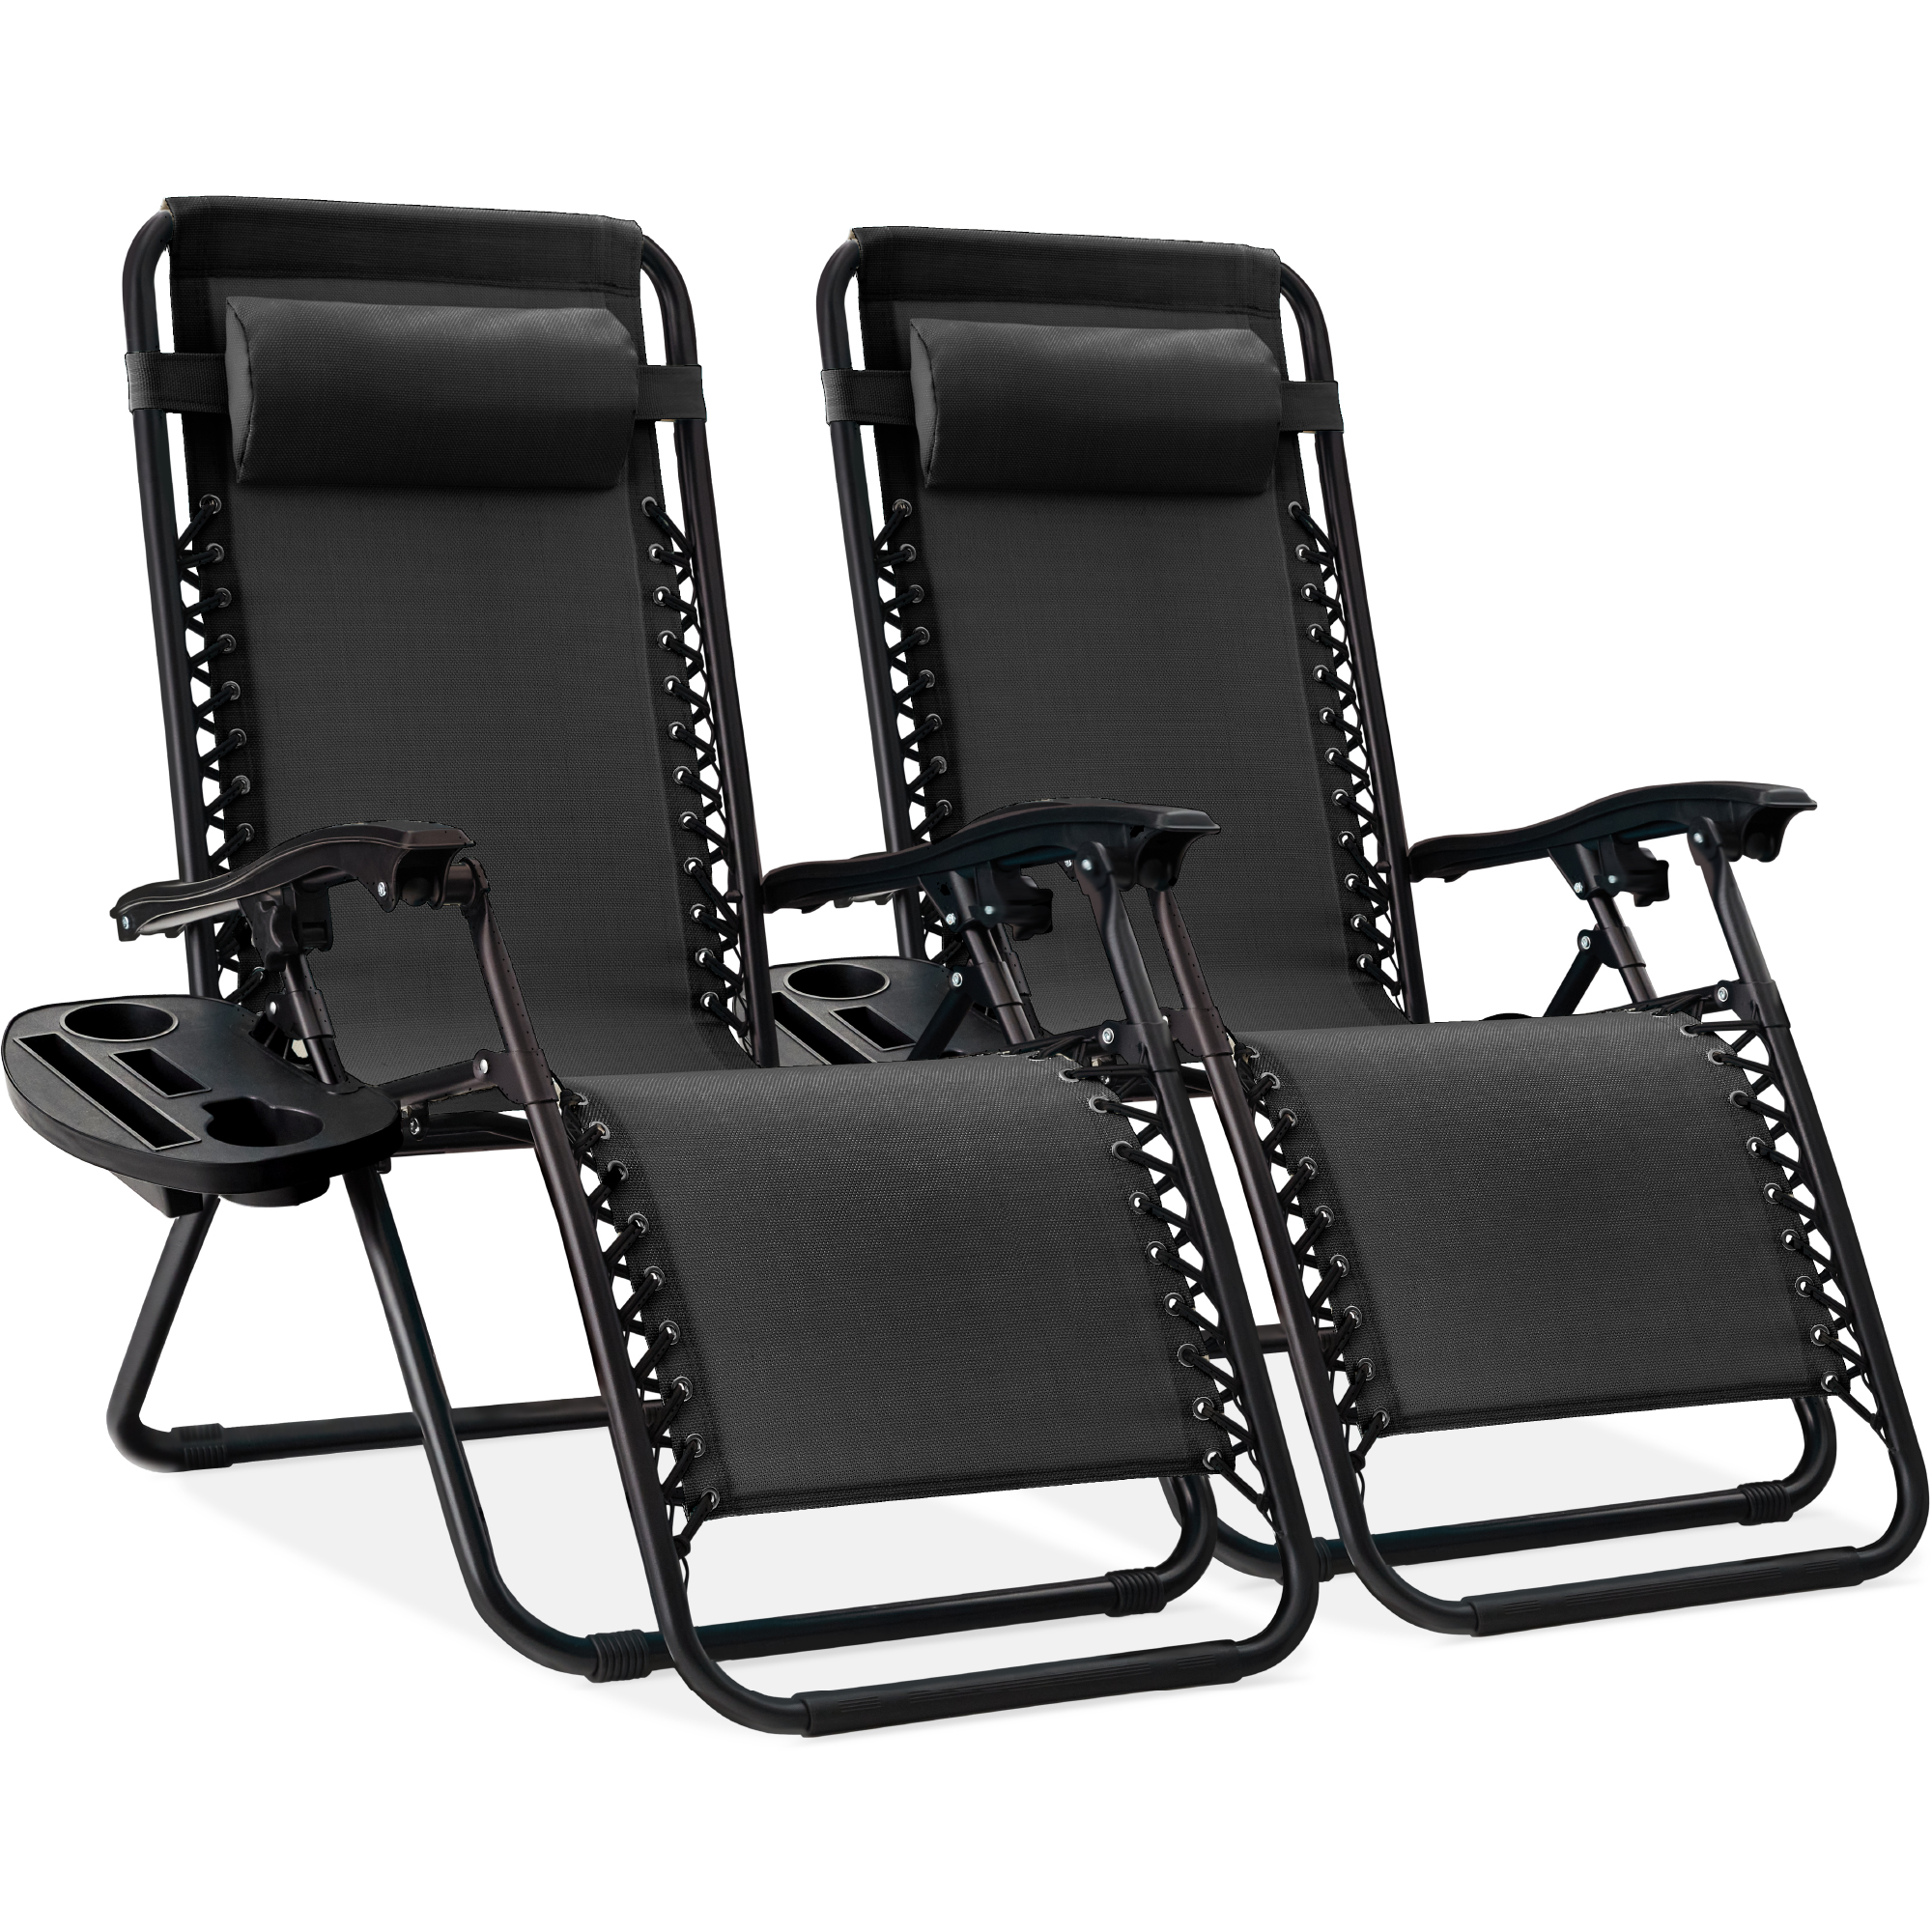 Best Choice Products Set of 2 Zero Gravity Lounge Chair Recliners for Patio, Pool w/ Cup Holder Tray - Black - image 1 of 8